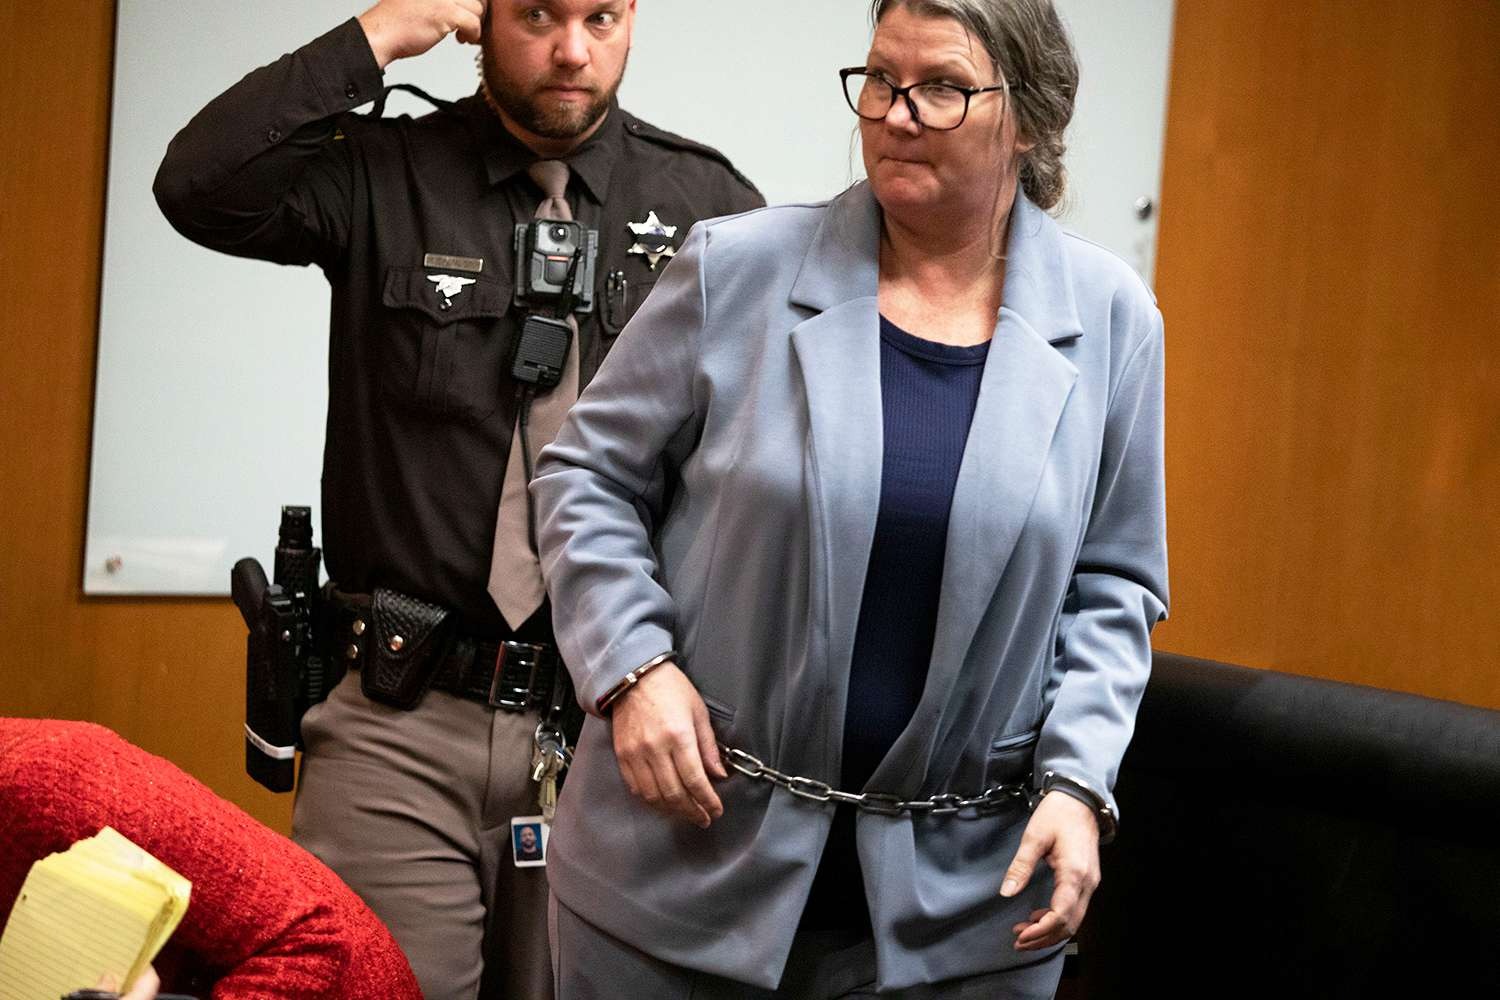 Michigan School Shooter's Mother Points Finger at Husband in Trial Testimony